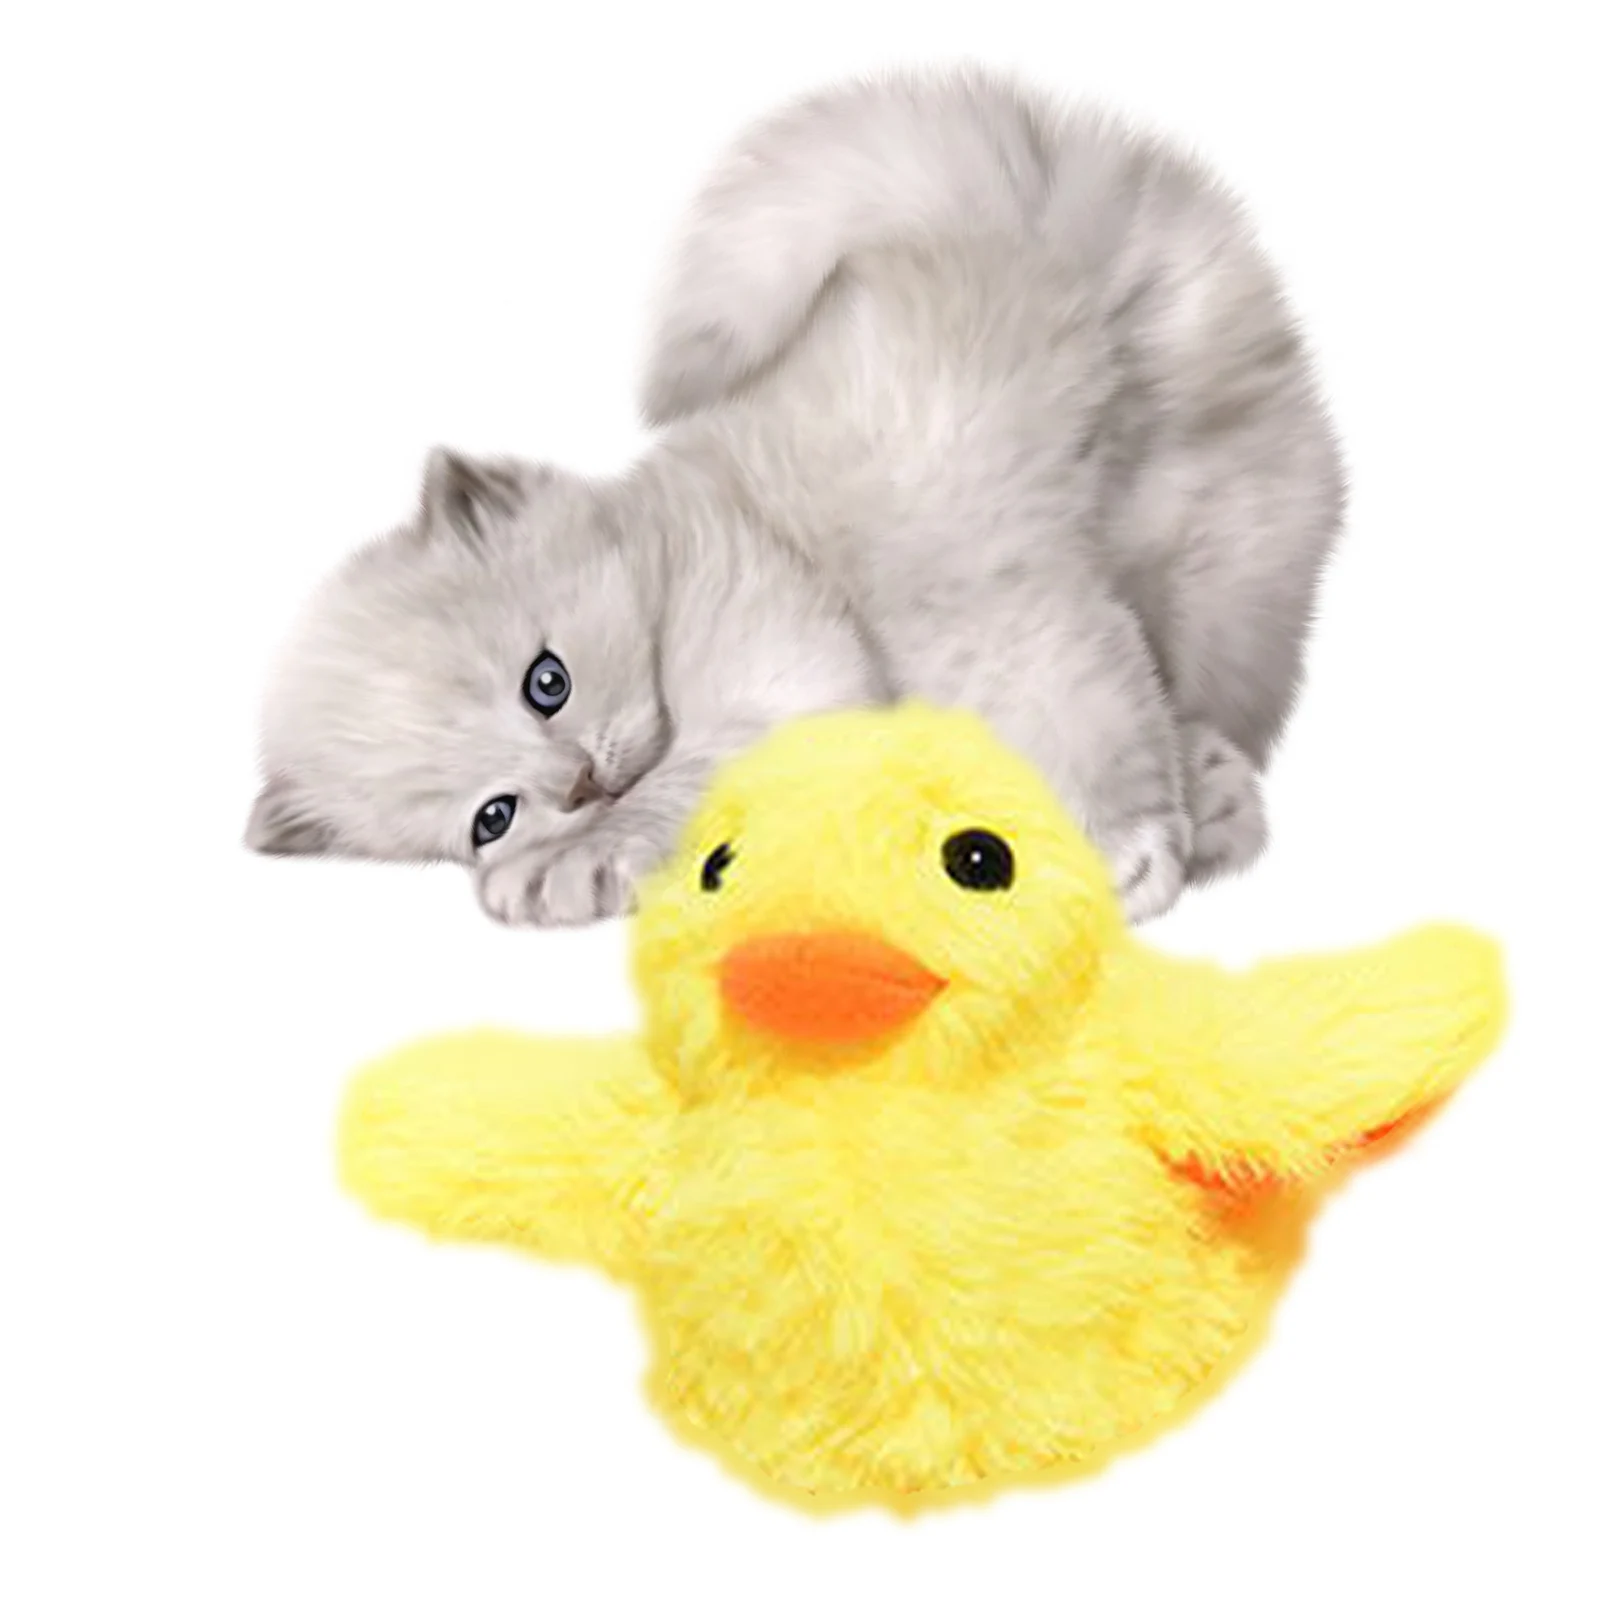 

Pet Sounding Toy Eco-Friendly Cat Chew Toy Catnip Filled Kitten Toy Soft Duck Toys Playing Chewing Teeth Cleaning Realistic